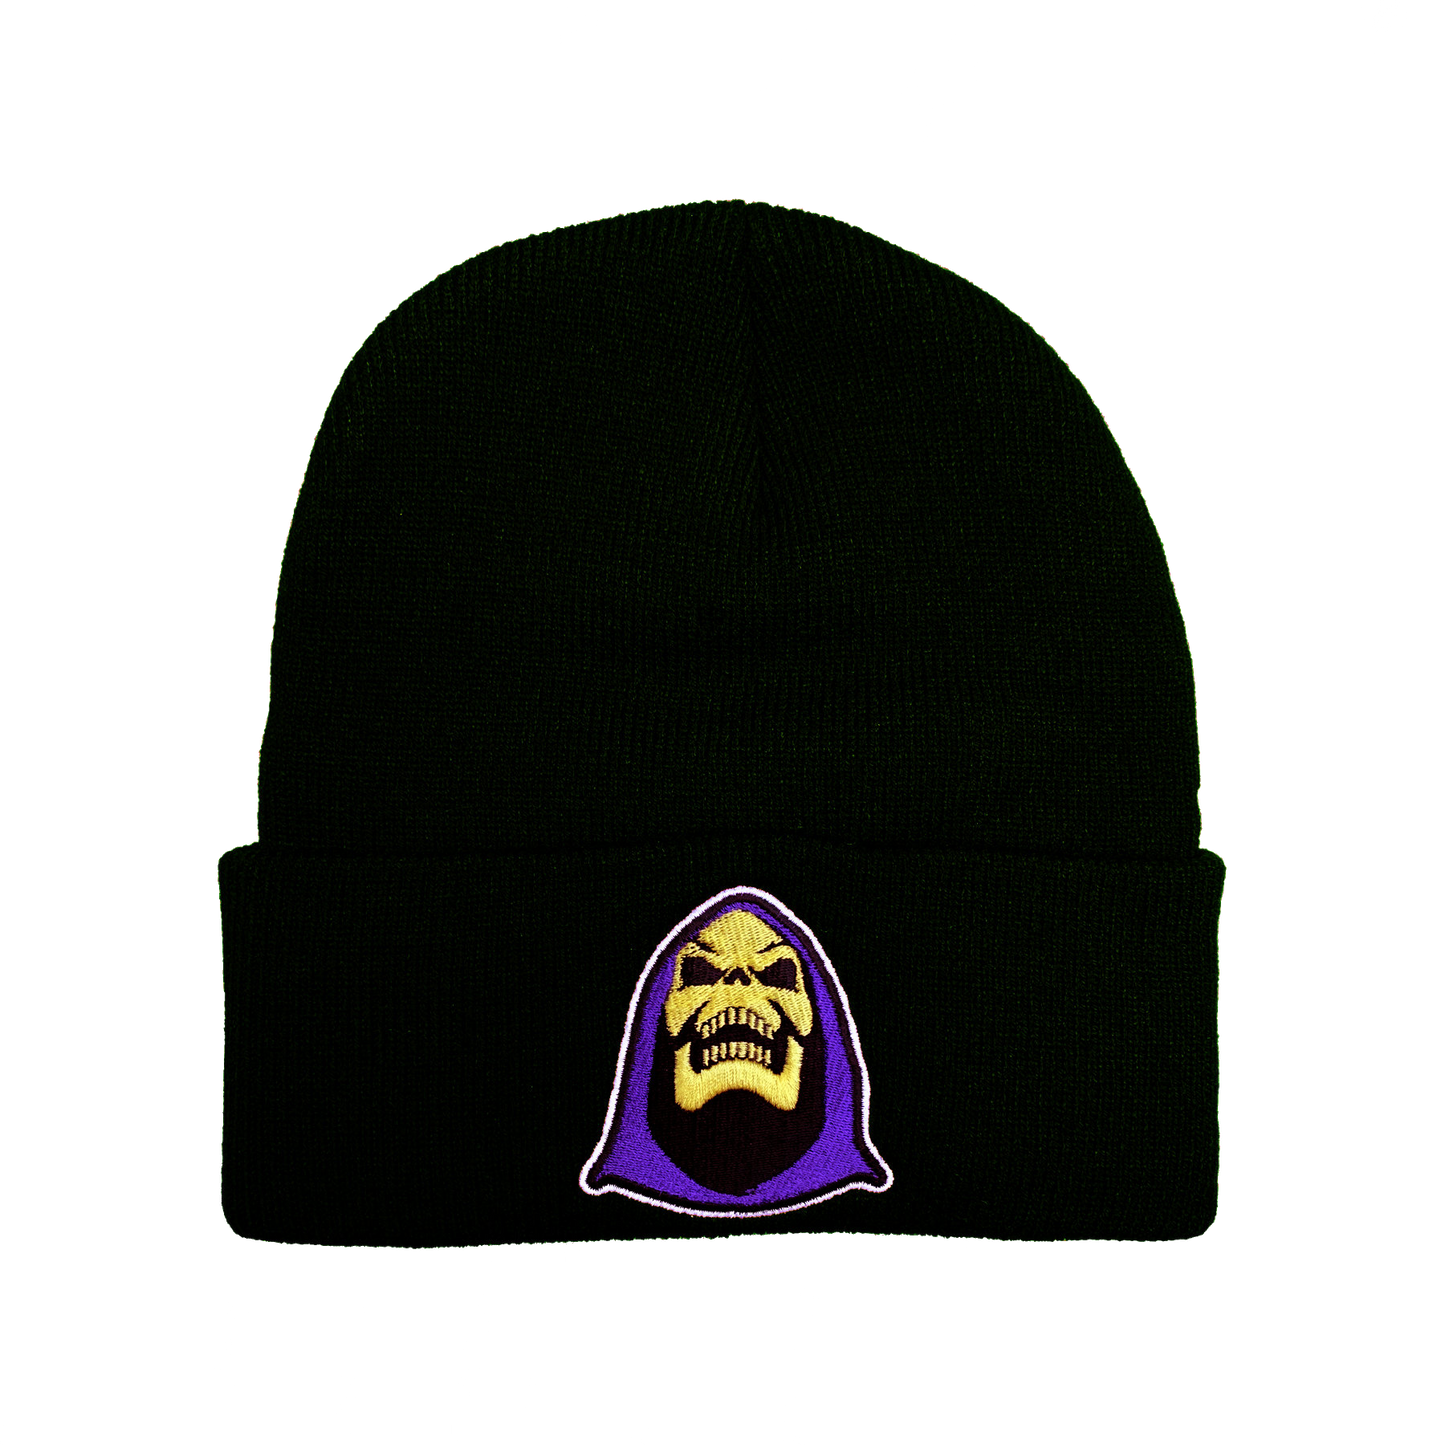 Skeletor Embroidered Beanie - UNMASKED Horror & Punk Patches and Decor